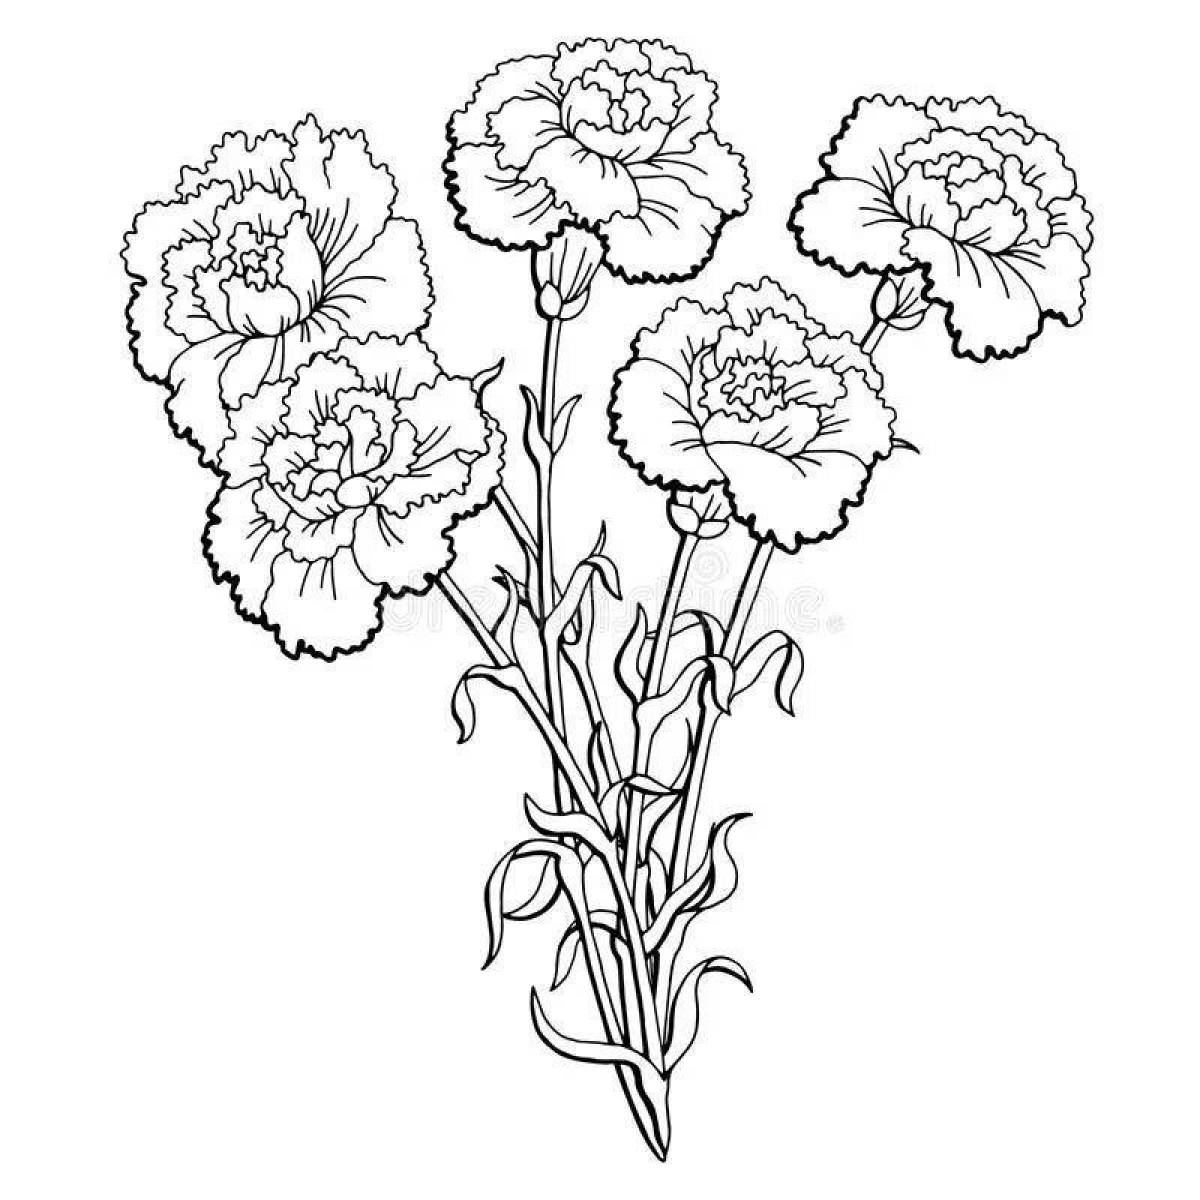 Awesome carnation coloring pages